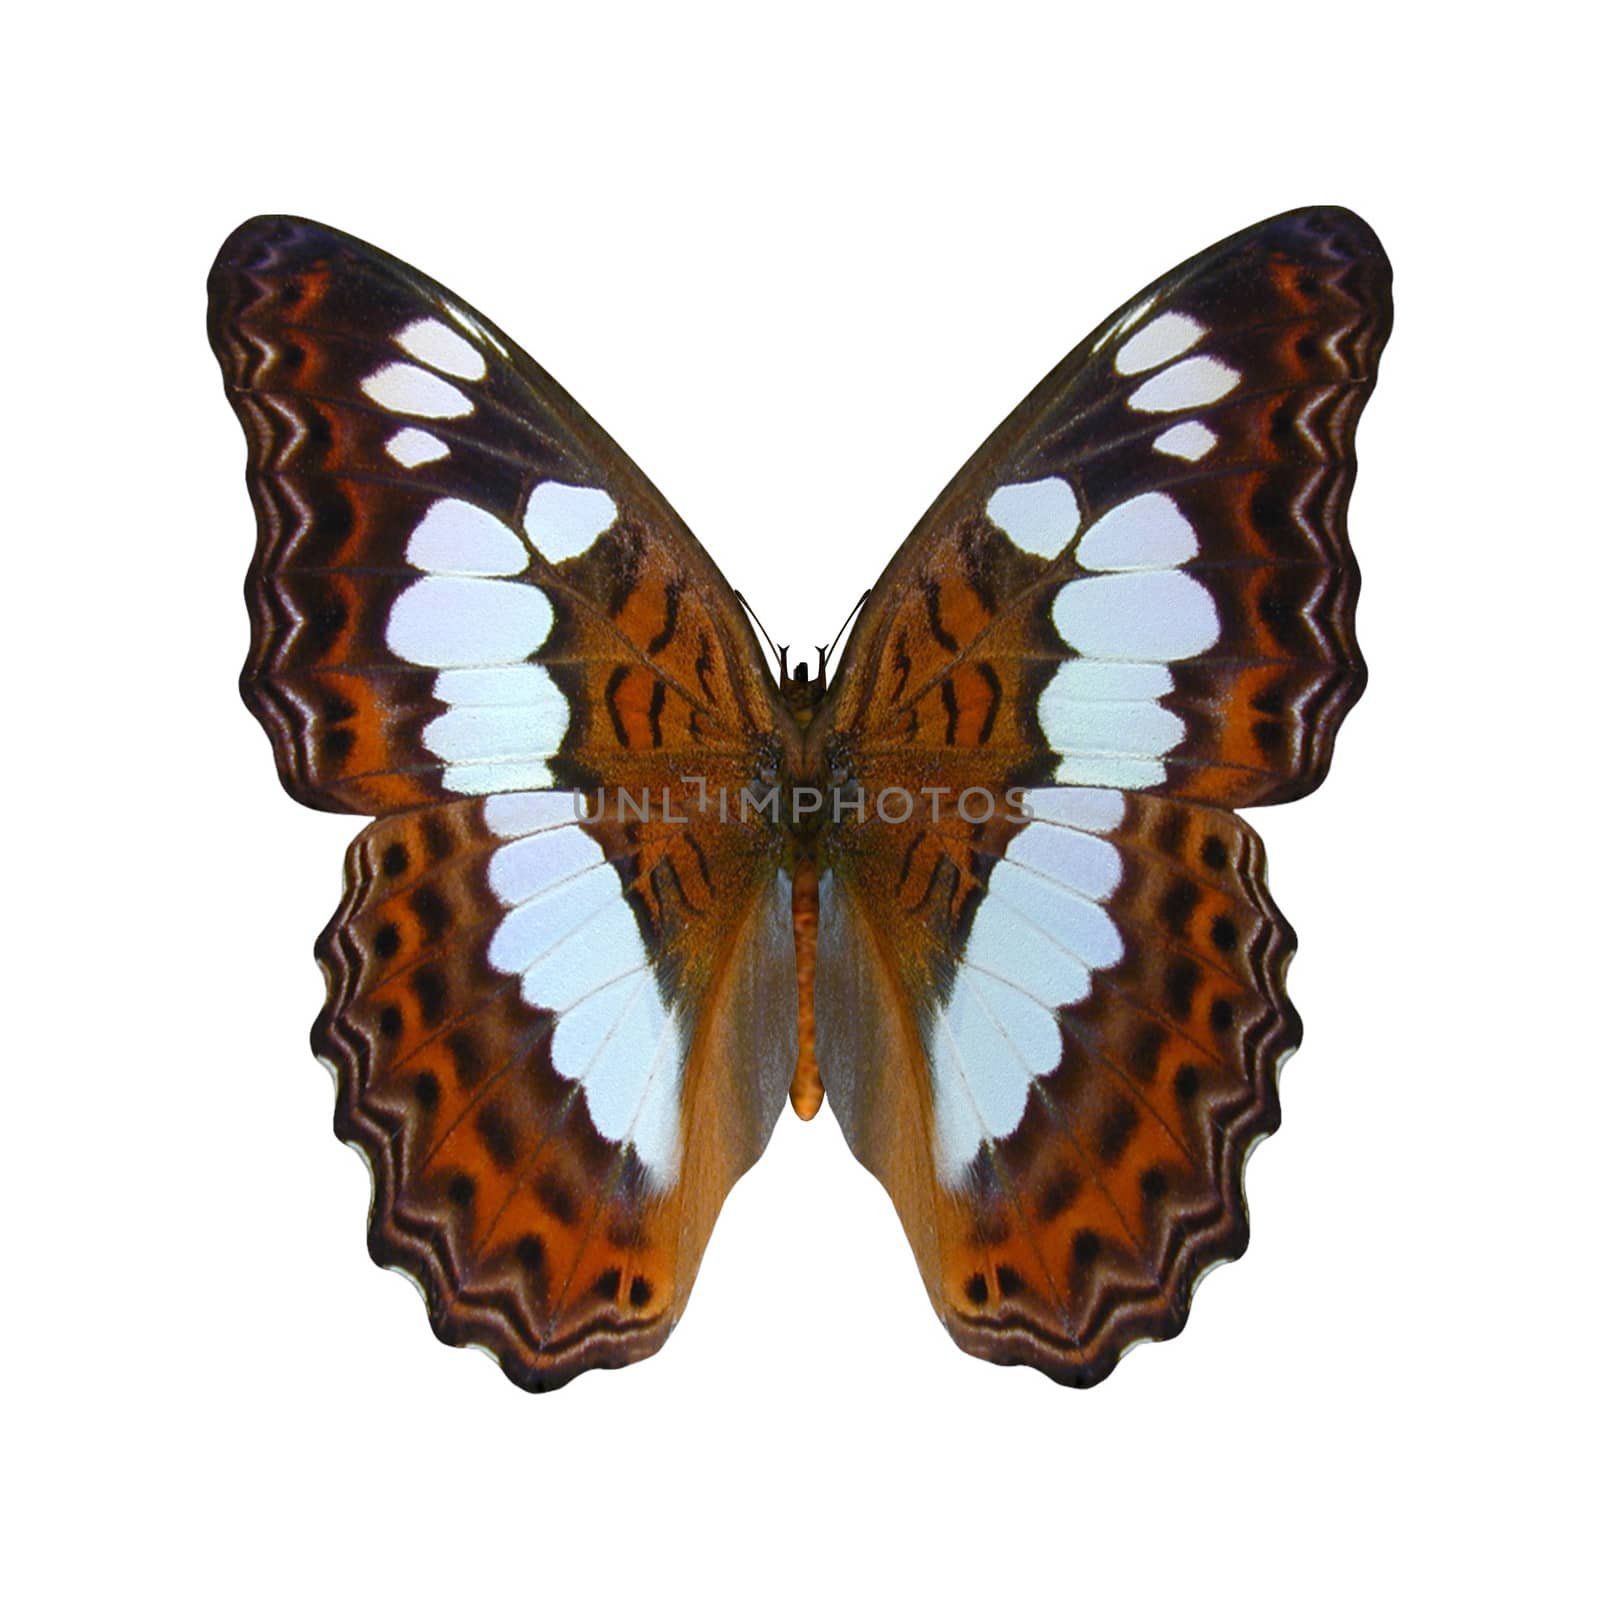 3D digital render of a White Admiral butterfly, isolated on white background